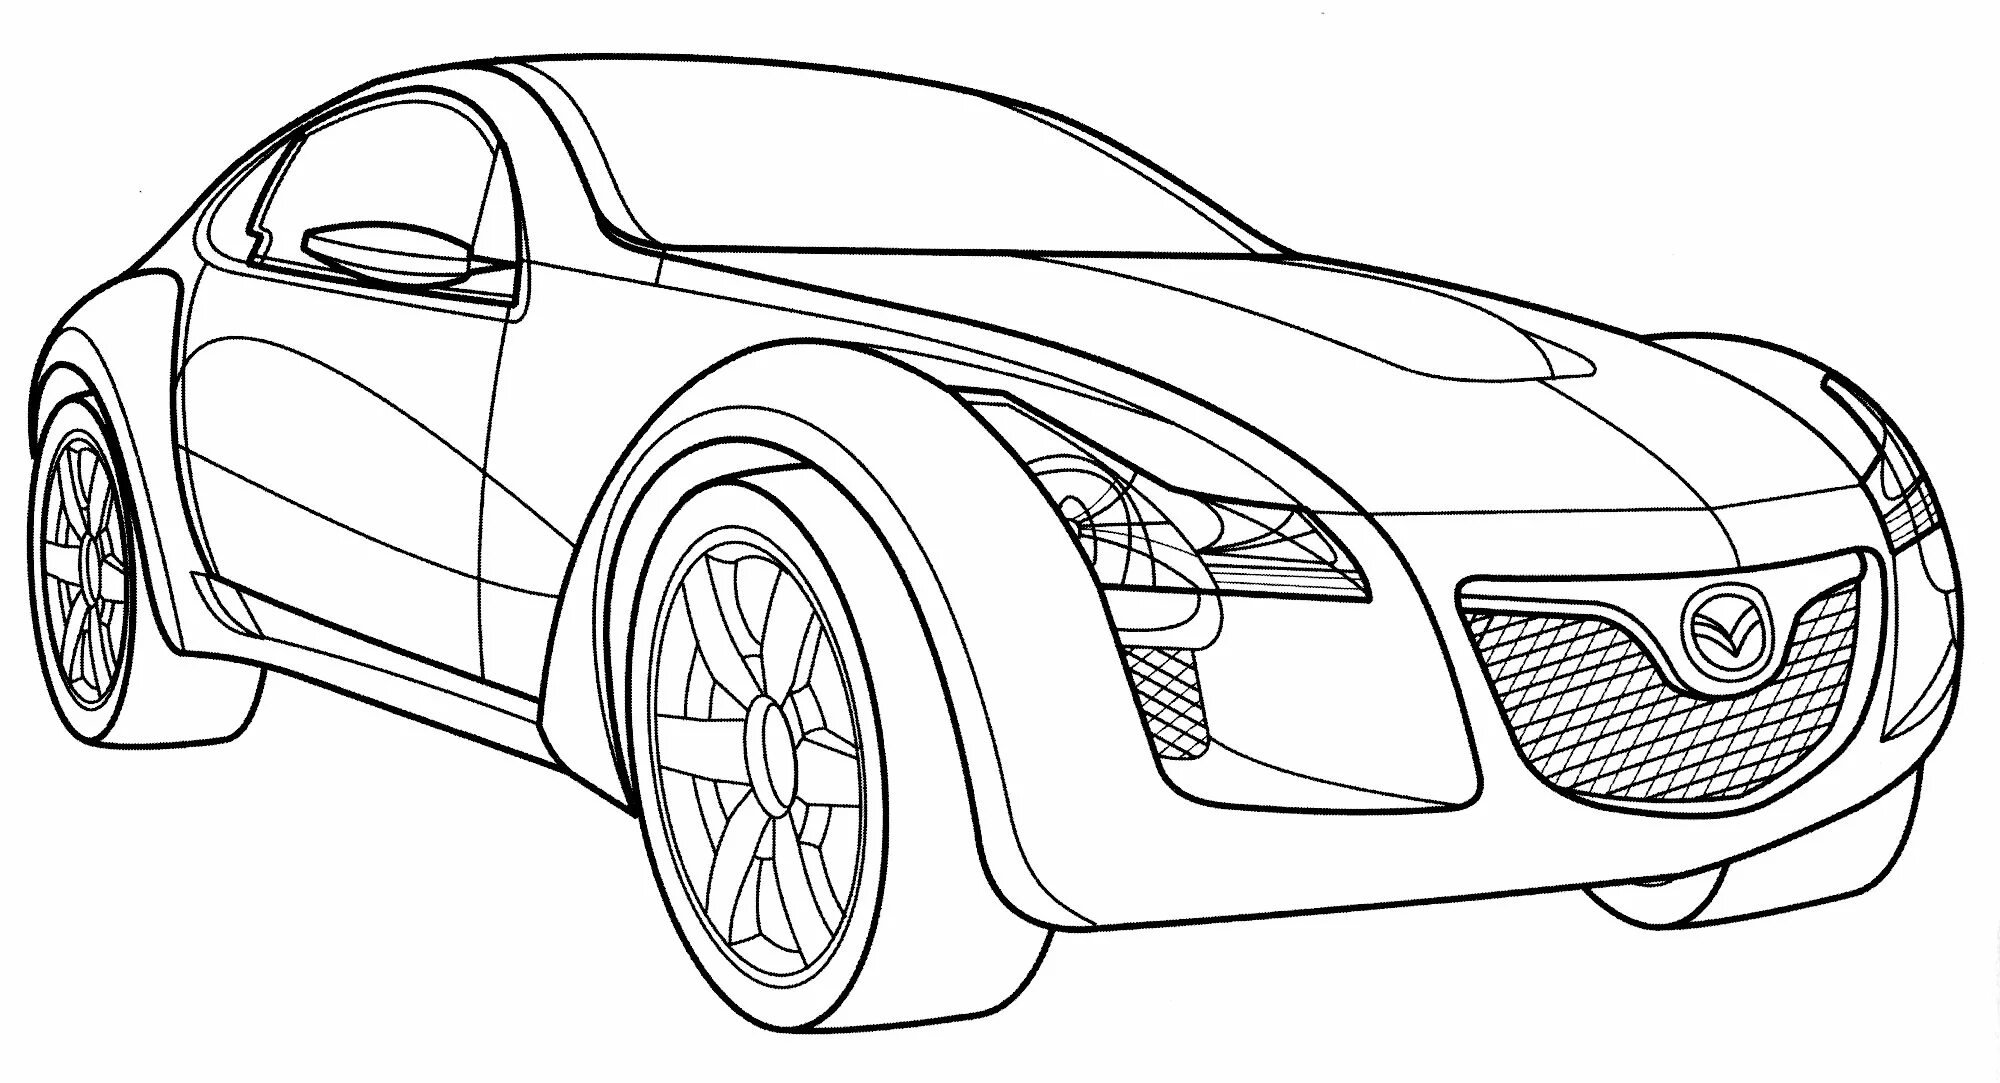 Coloring book glowing sports mercedes